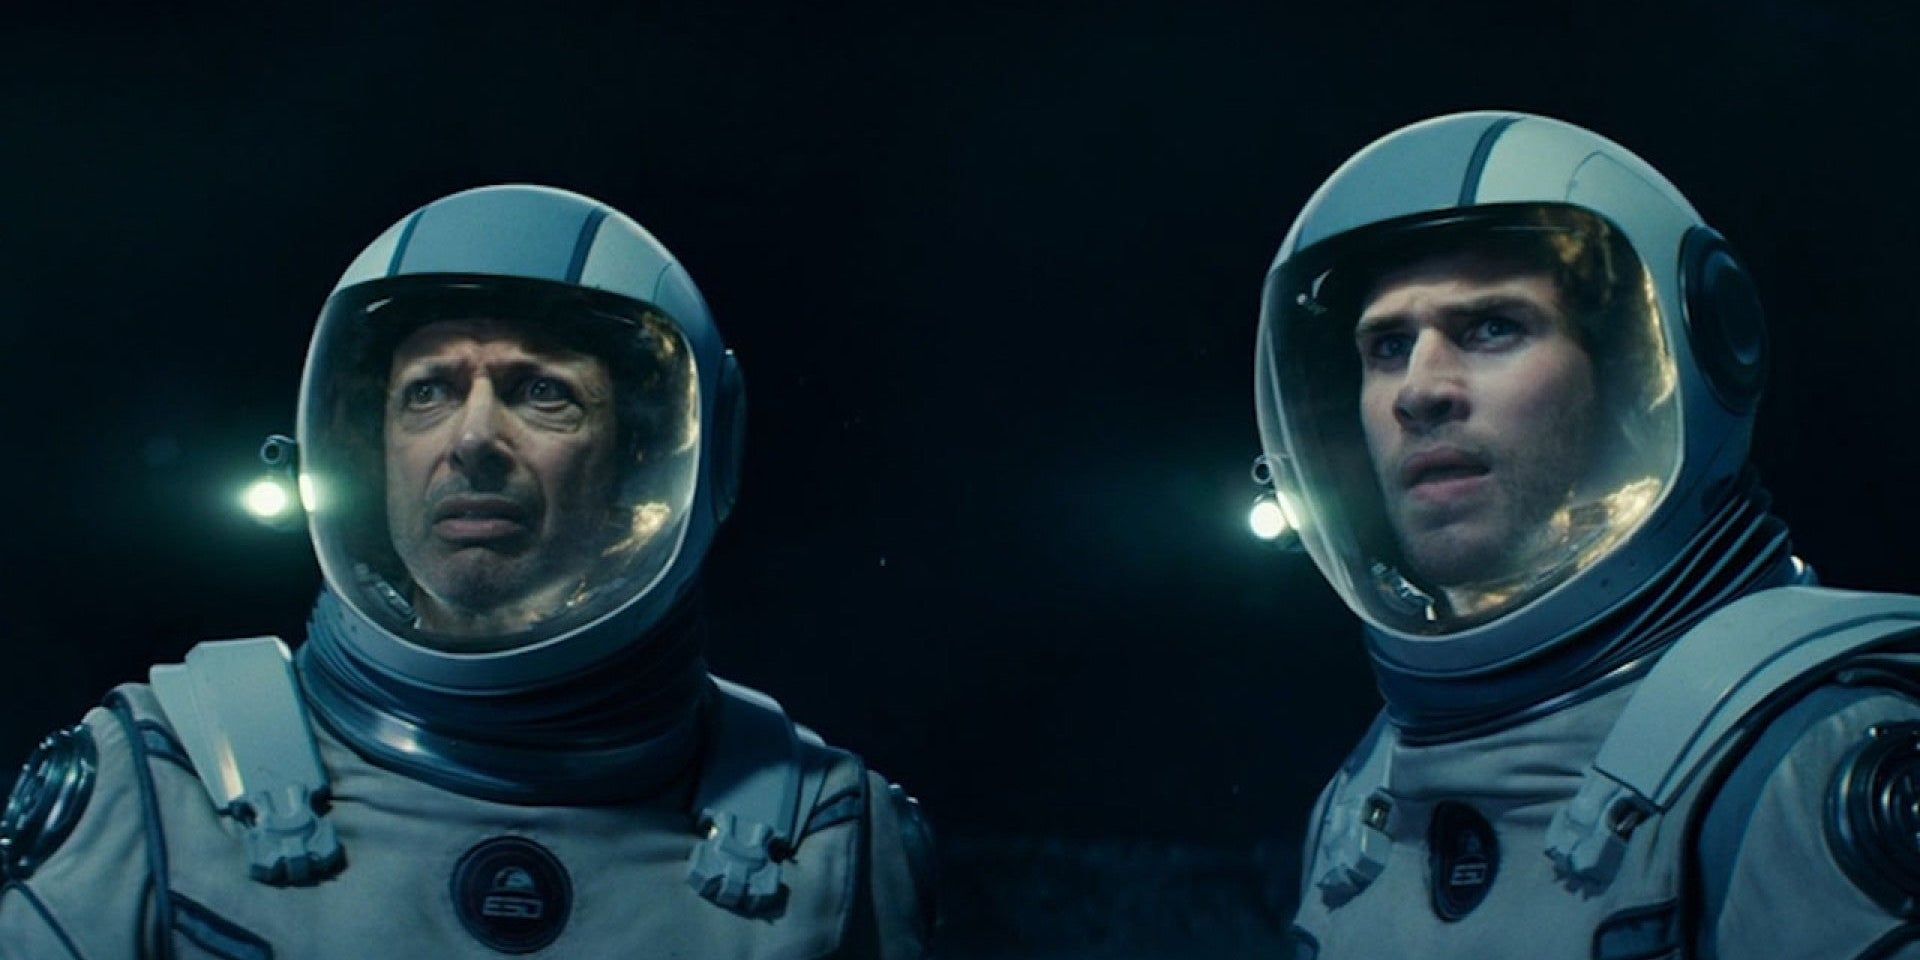 Jeff Goldblum and Liam Hemsworth in space in Independence Day Resurgence